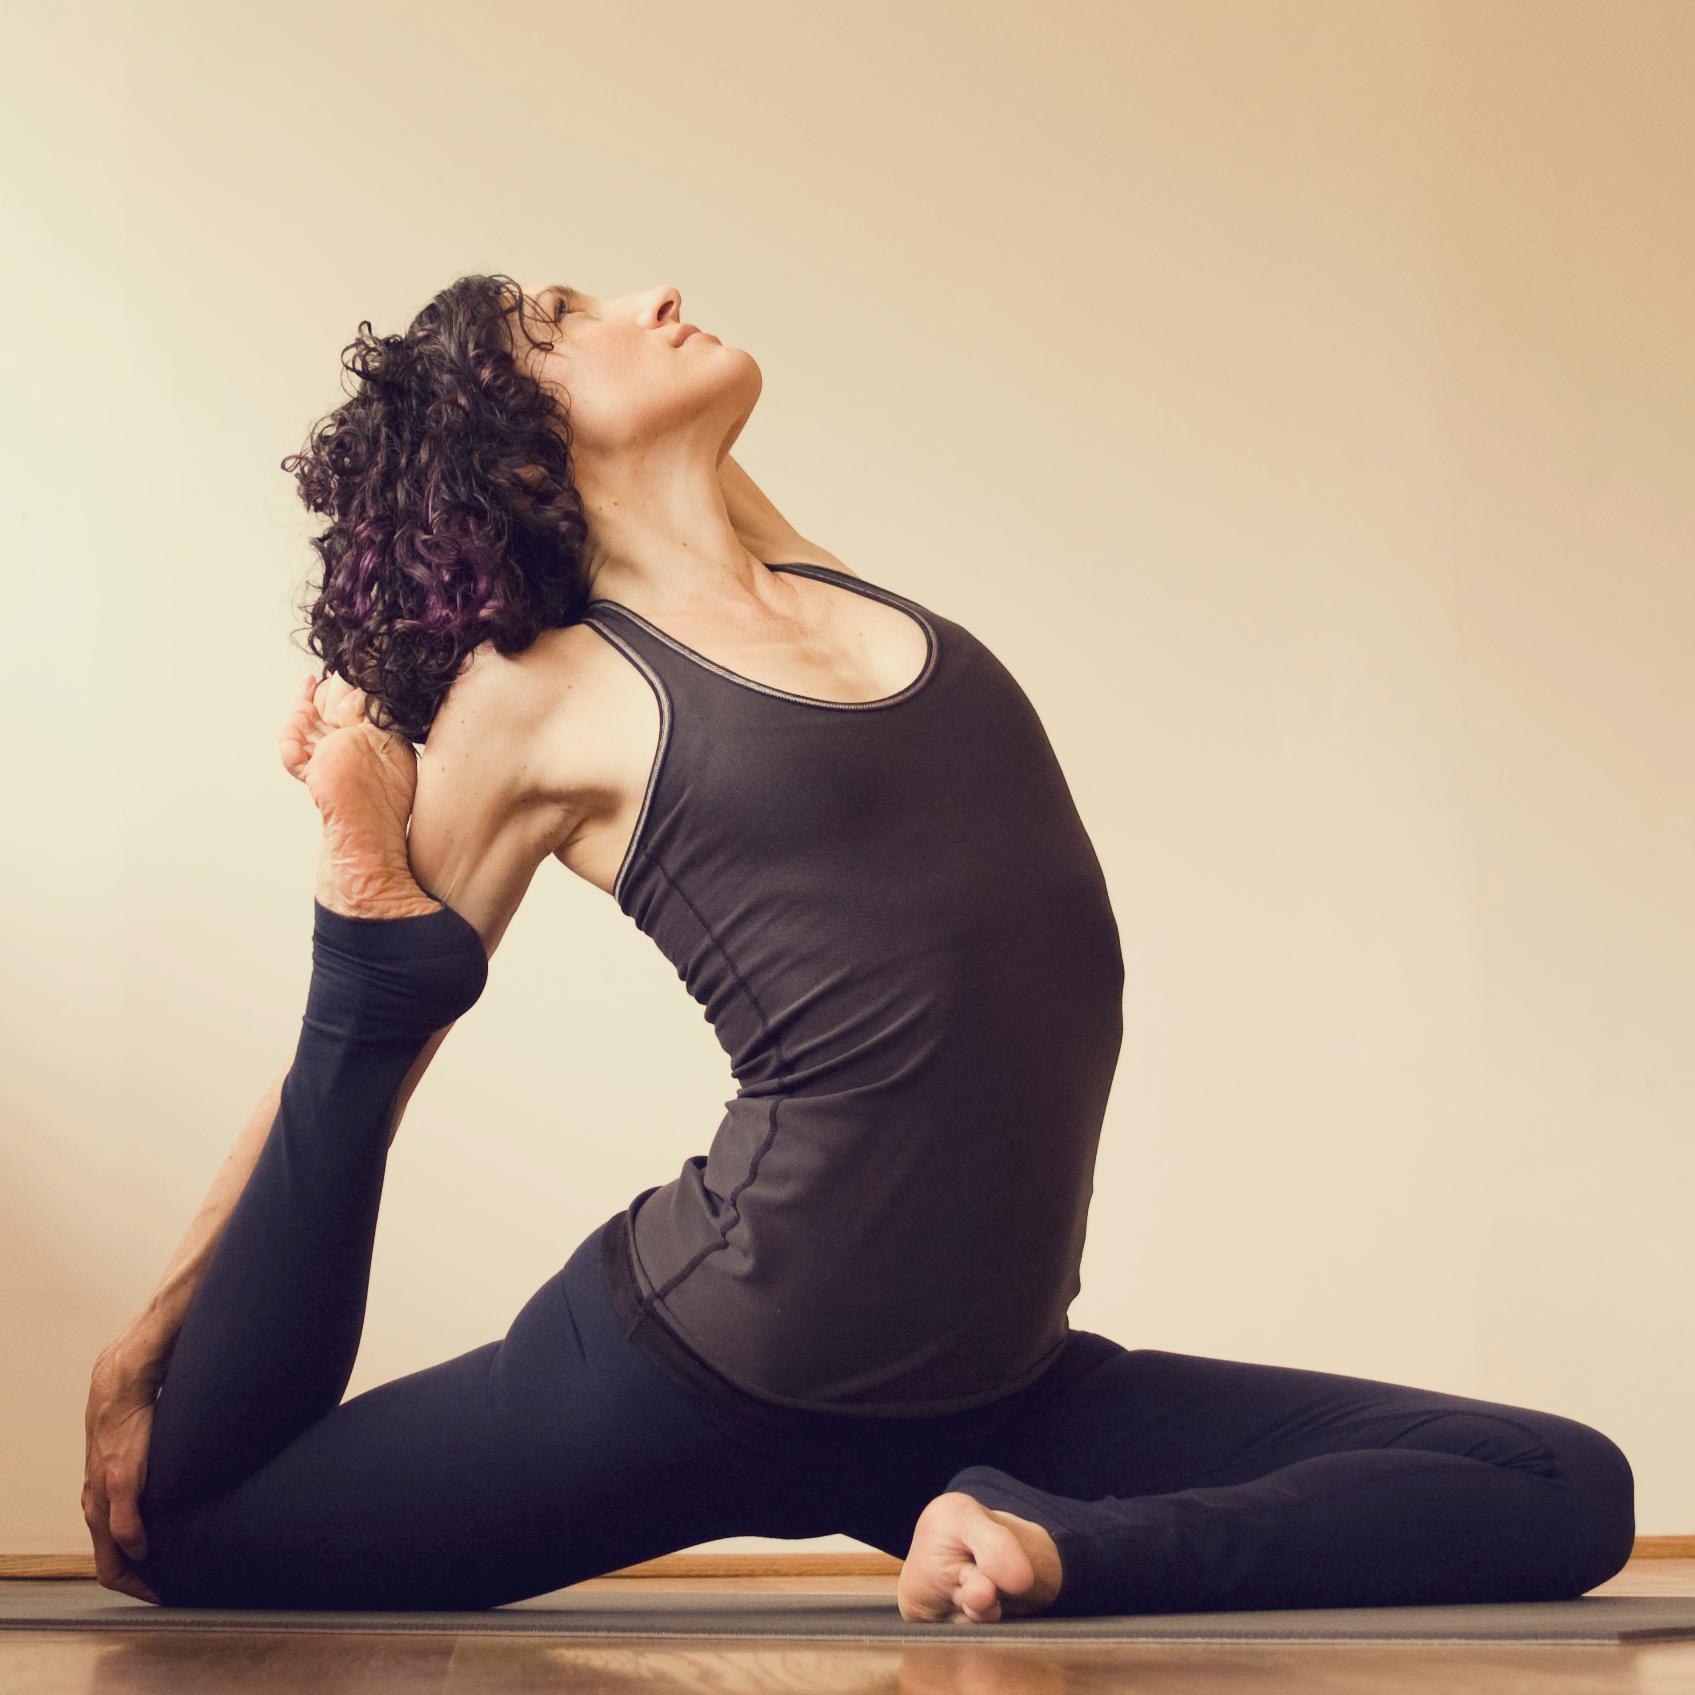 Radical alignment, Tantric meditation, Ayurvedic flow, radiant practice.YOGA with Gina: Immersion, Teacher Training, Workshops, Classes and Privates in ATL